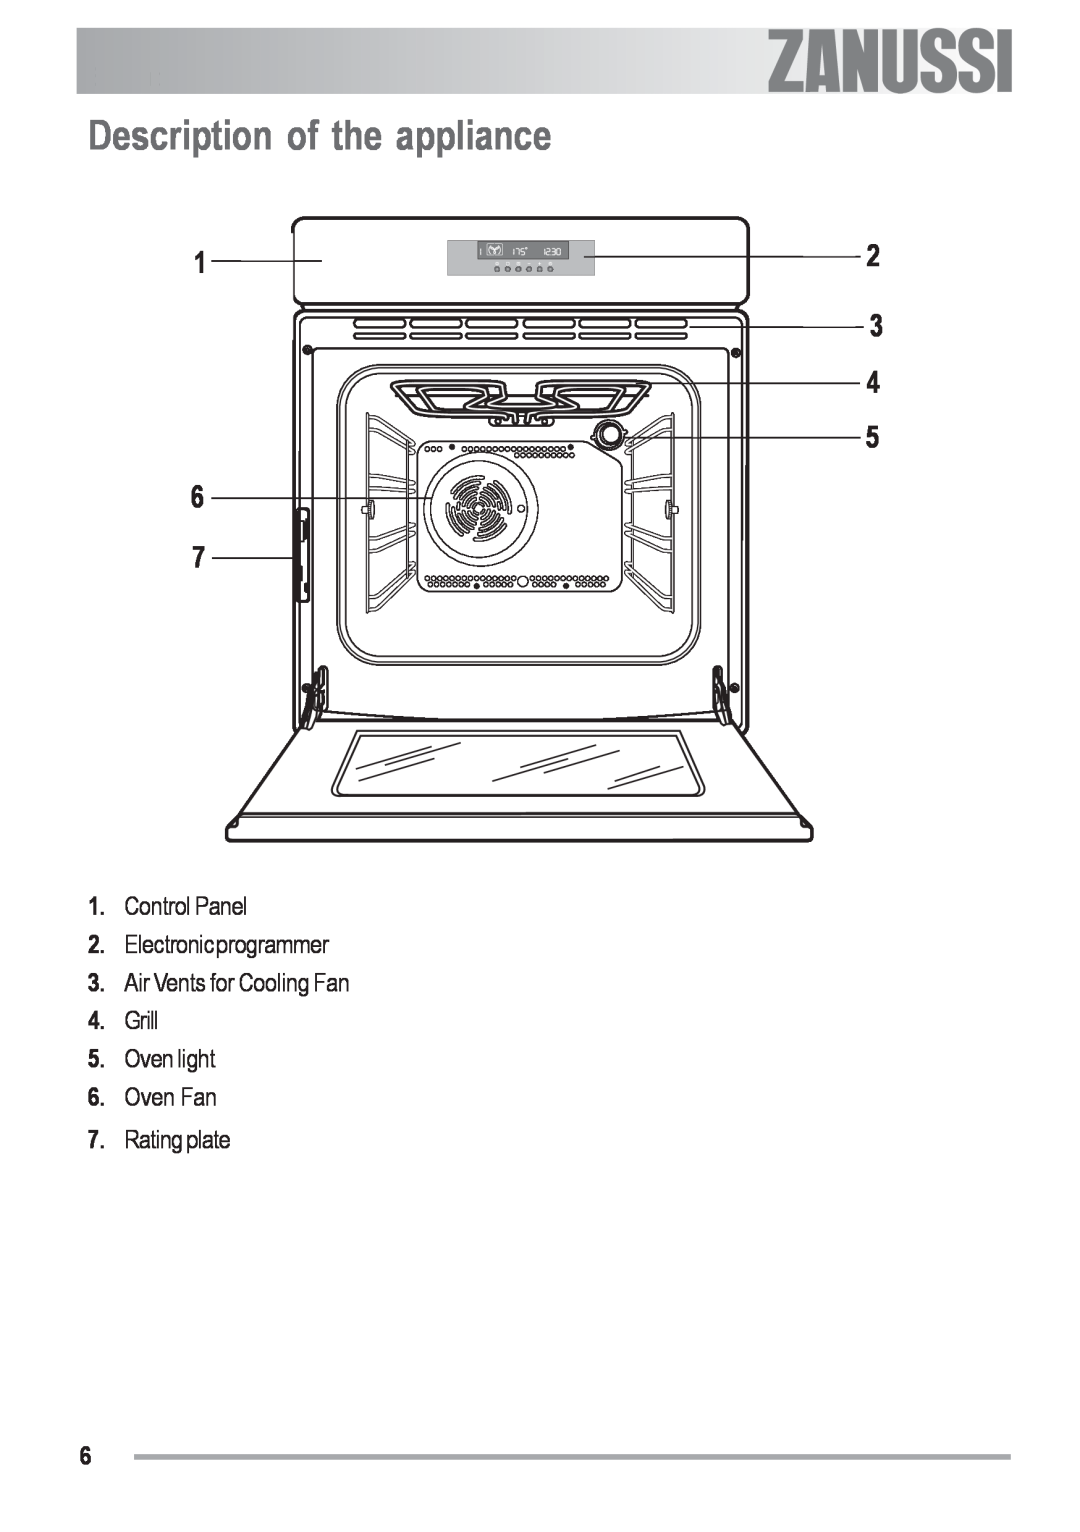 Zanussi ZOB 691 manual Description of the appliance, electrolux, Control Panel 2. Electronic programmer, Rating plate 